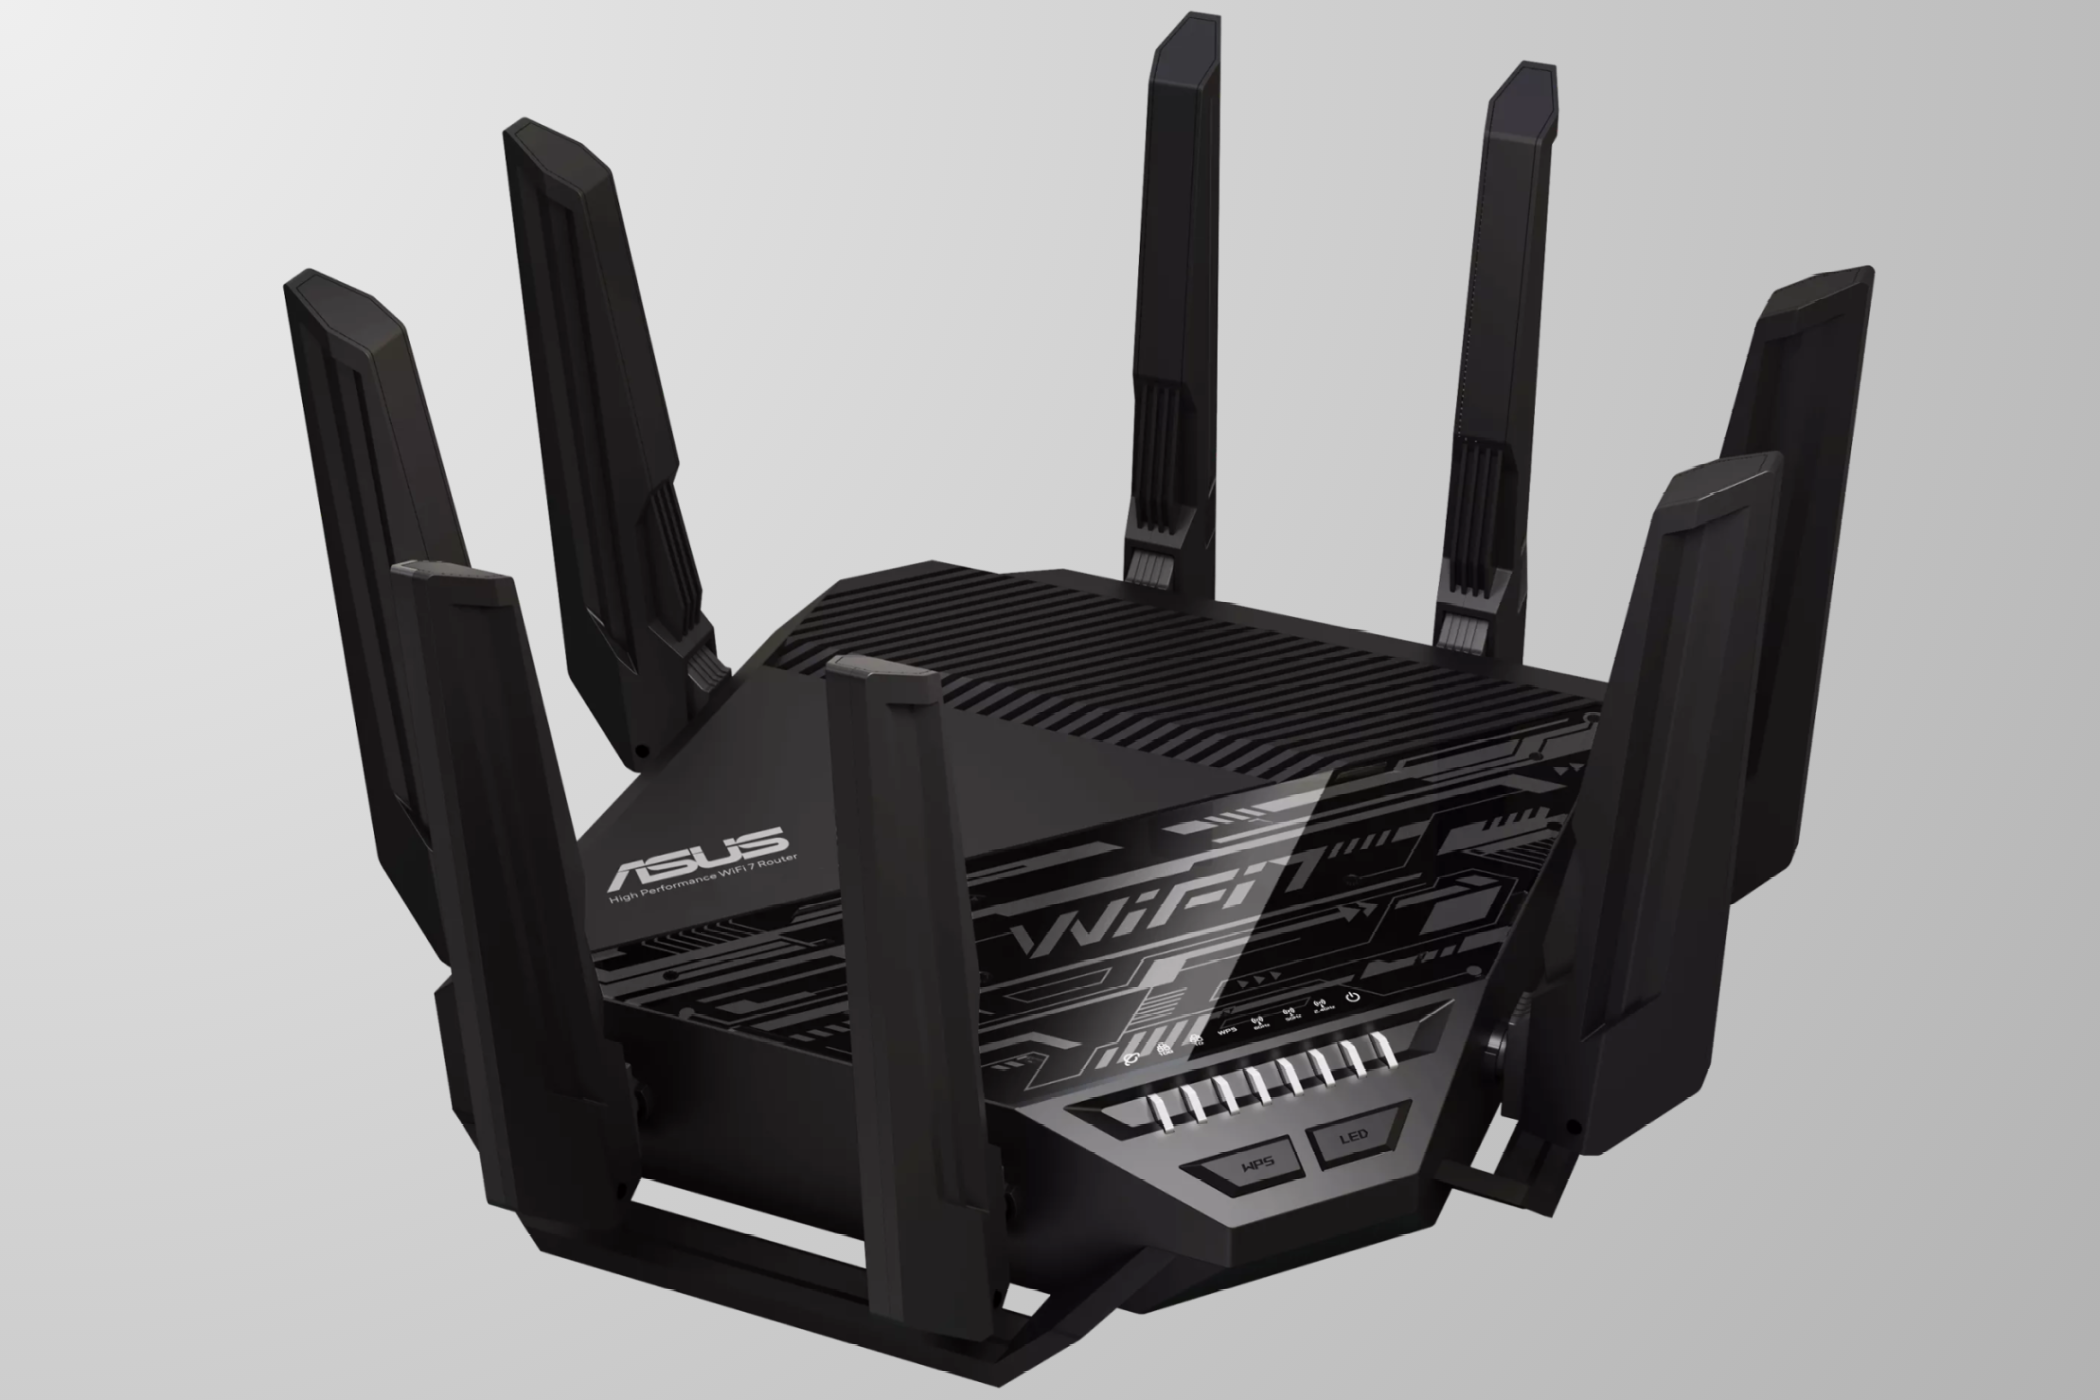 Is this tp link wifi 7 router worth buying? : r/wifi